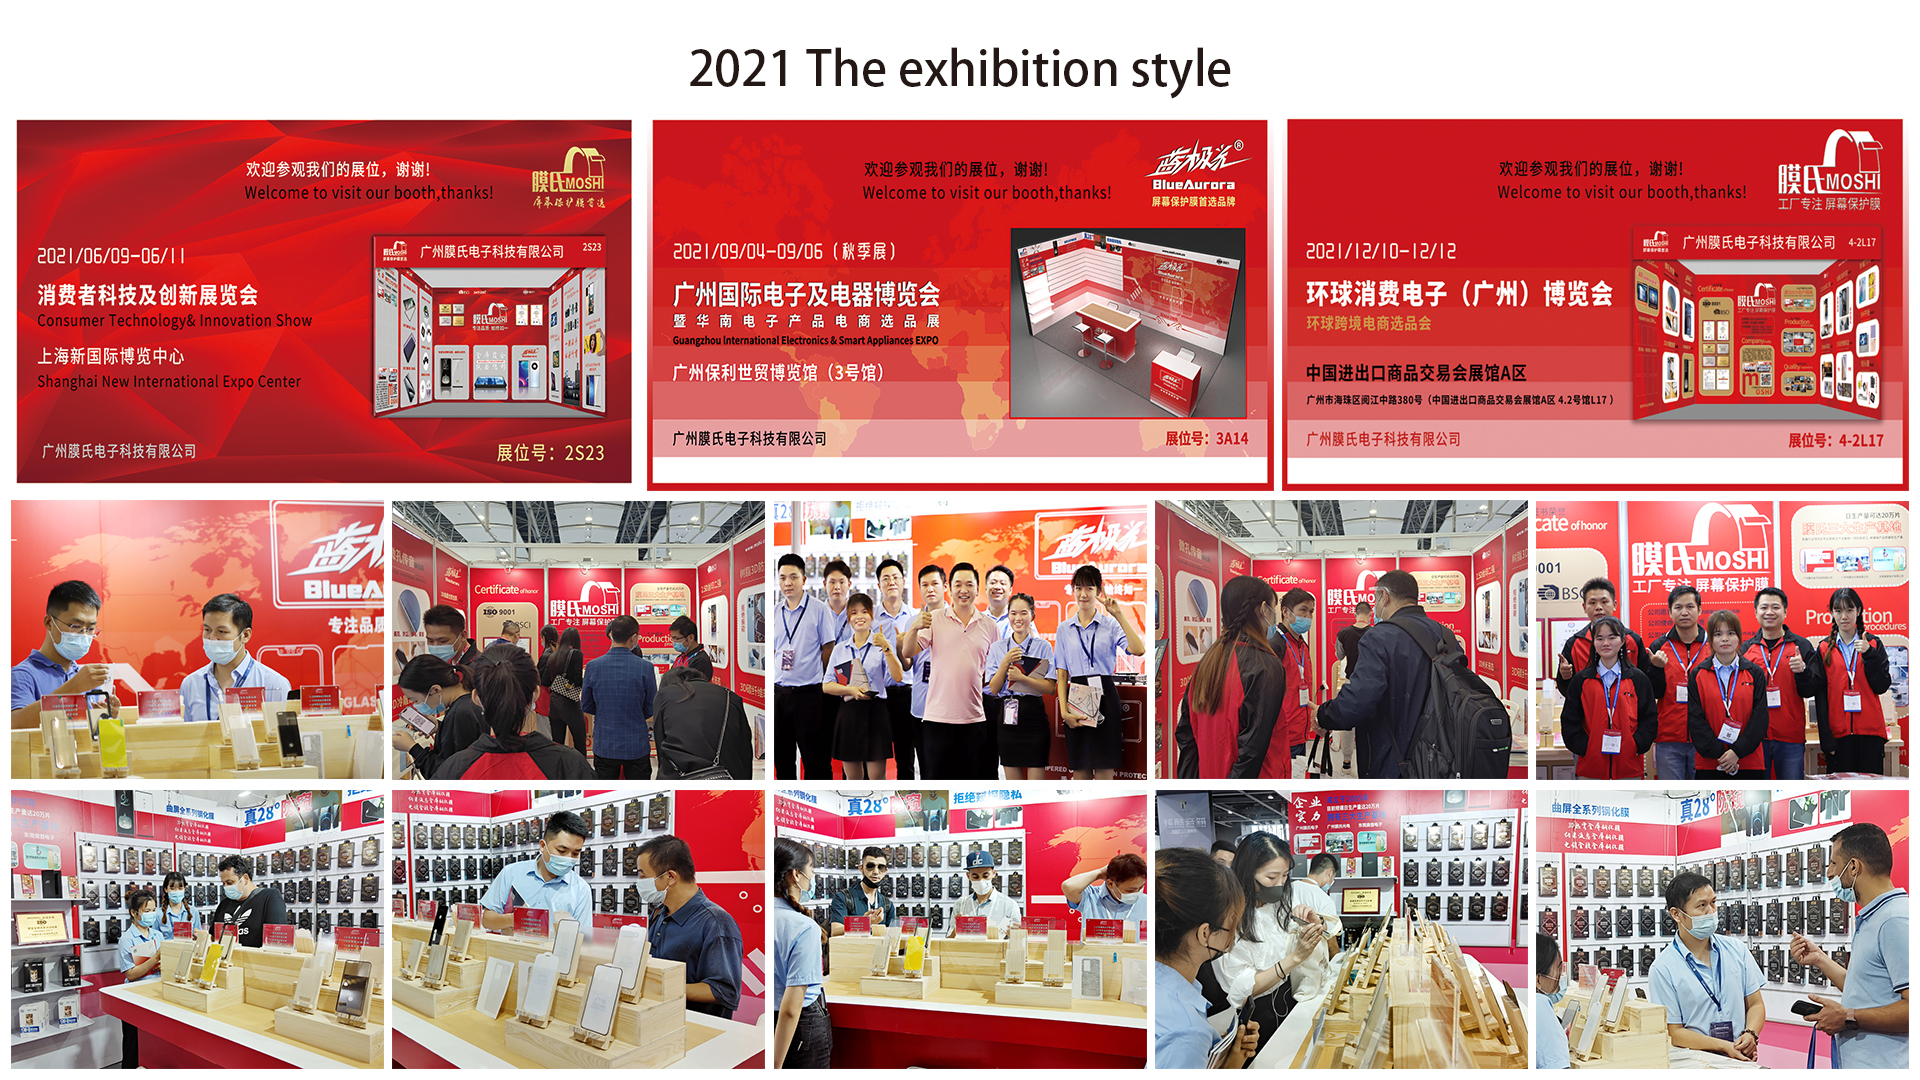 2021 The exhibition style